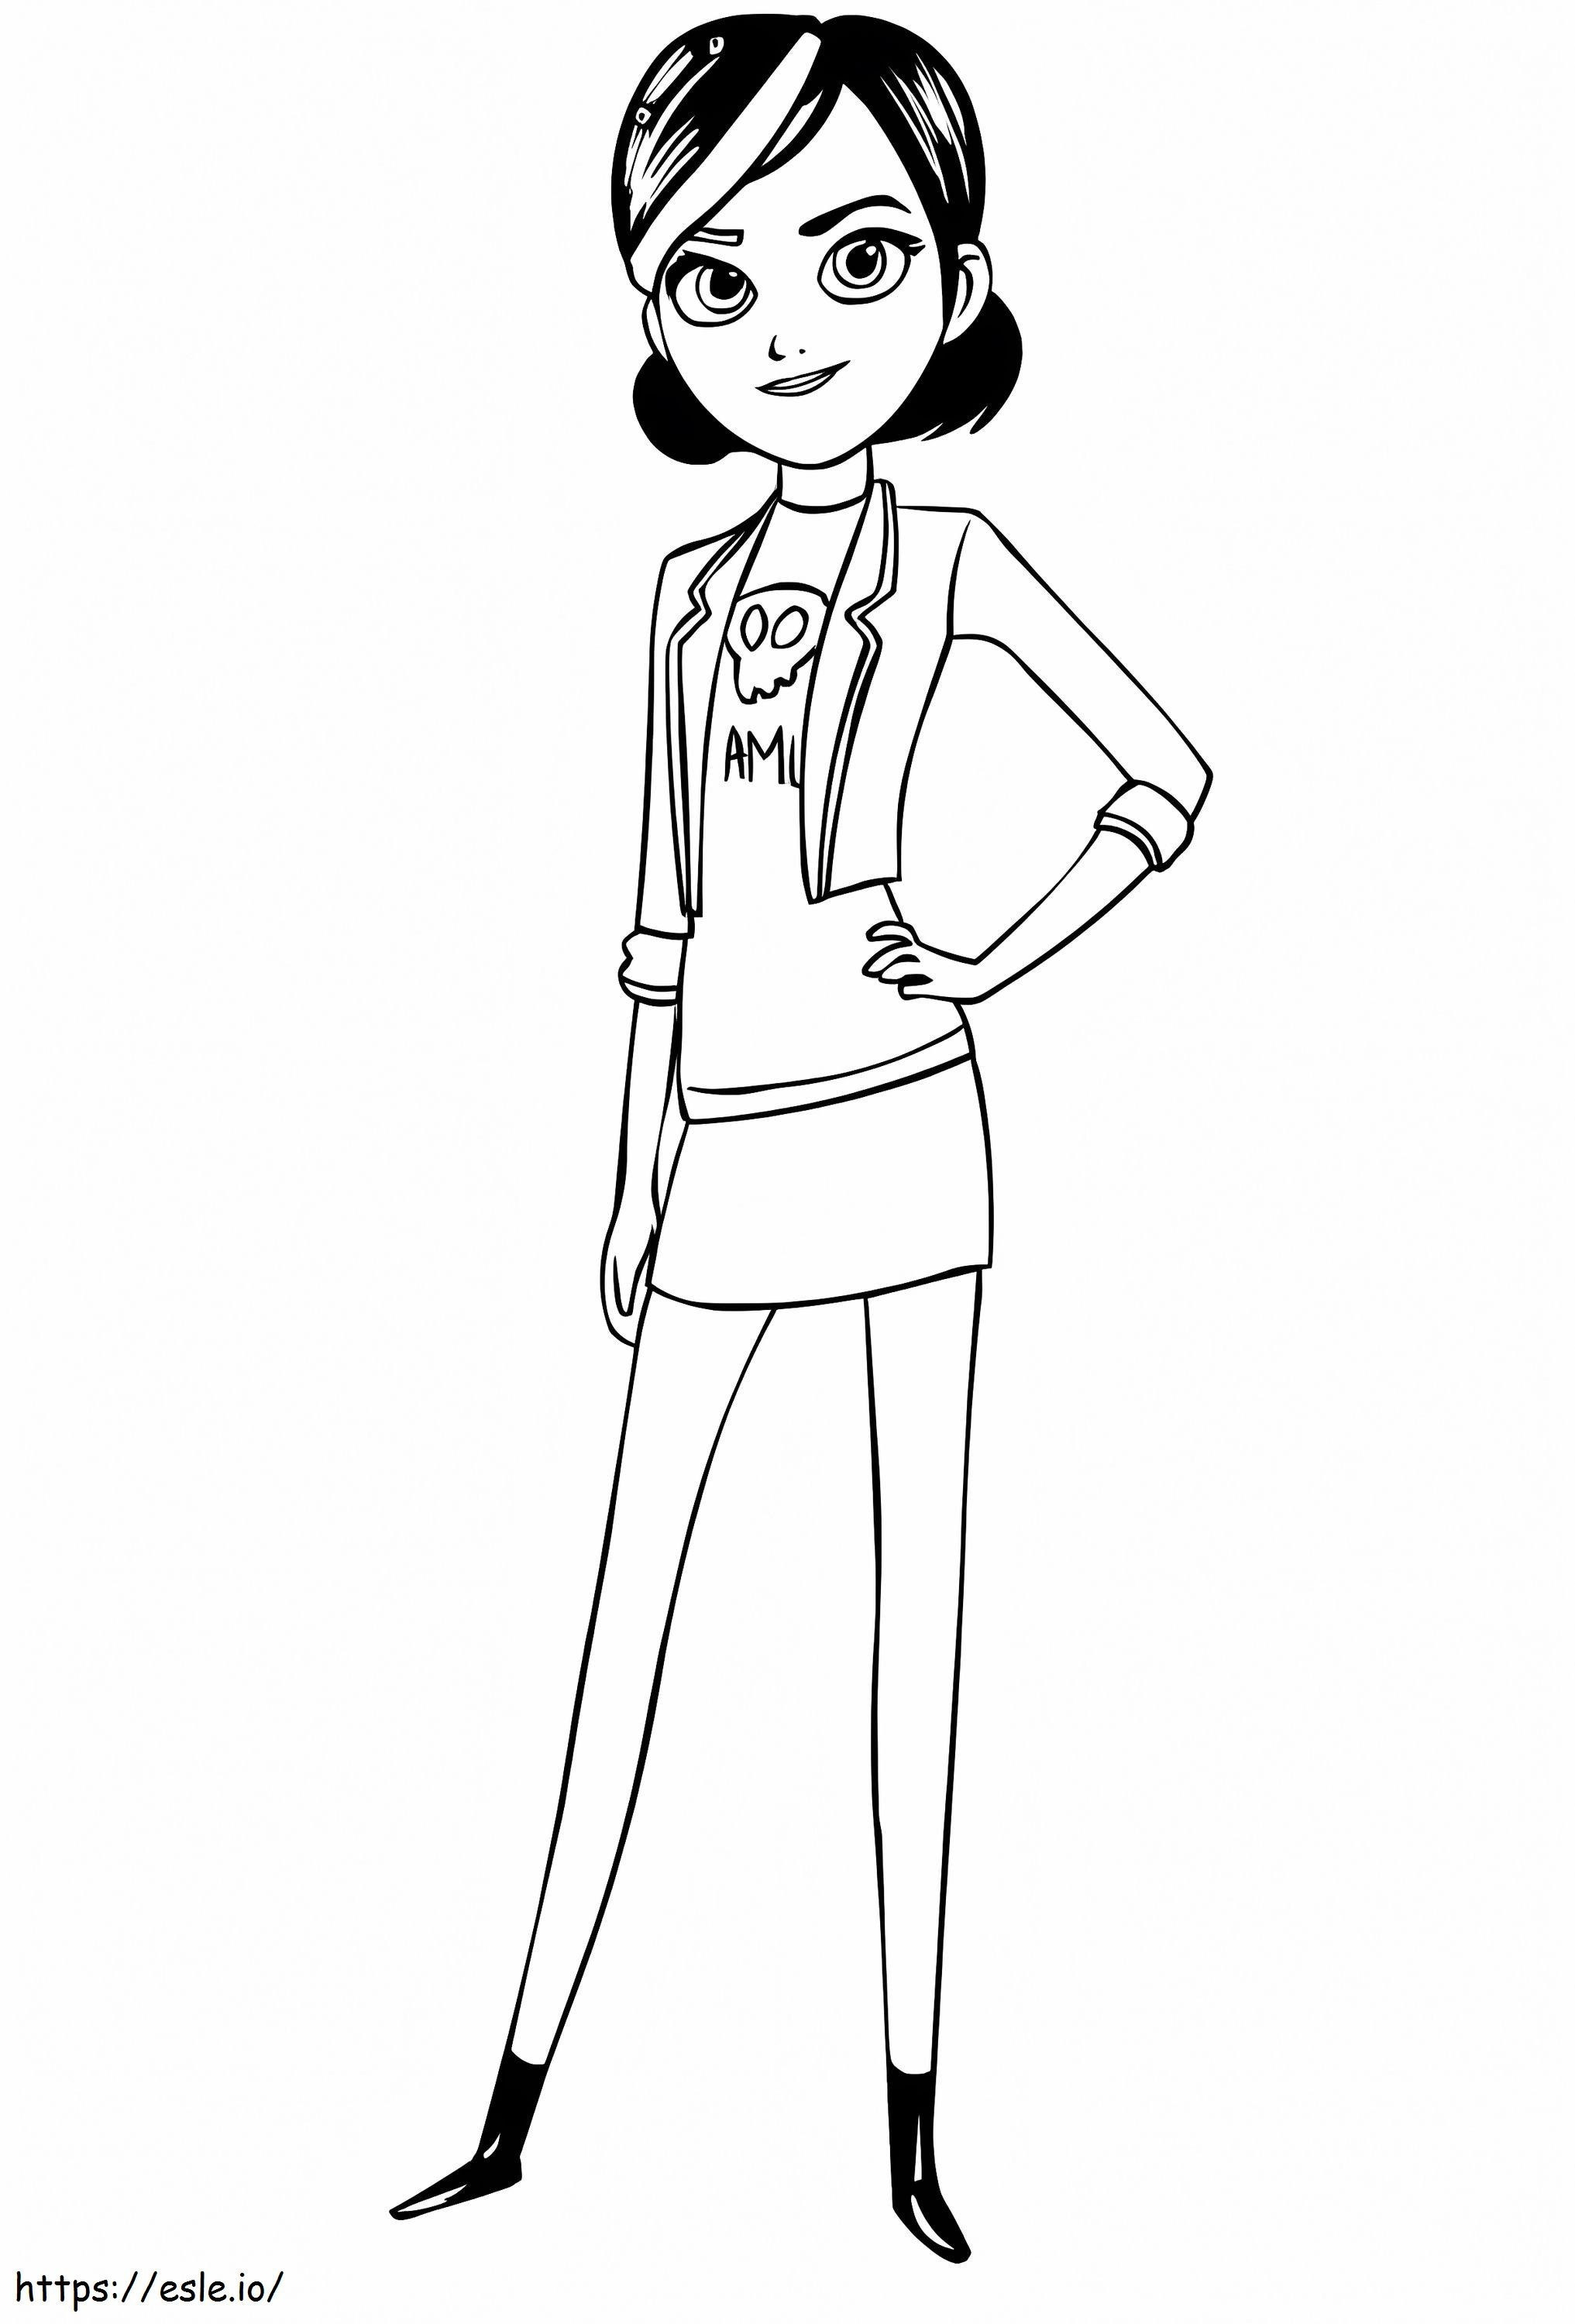 Claire From Trollhunters coloring page